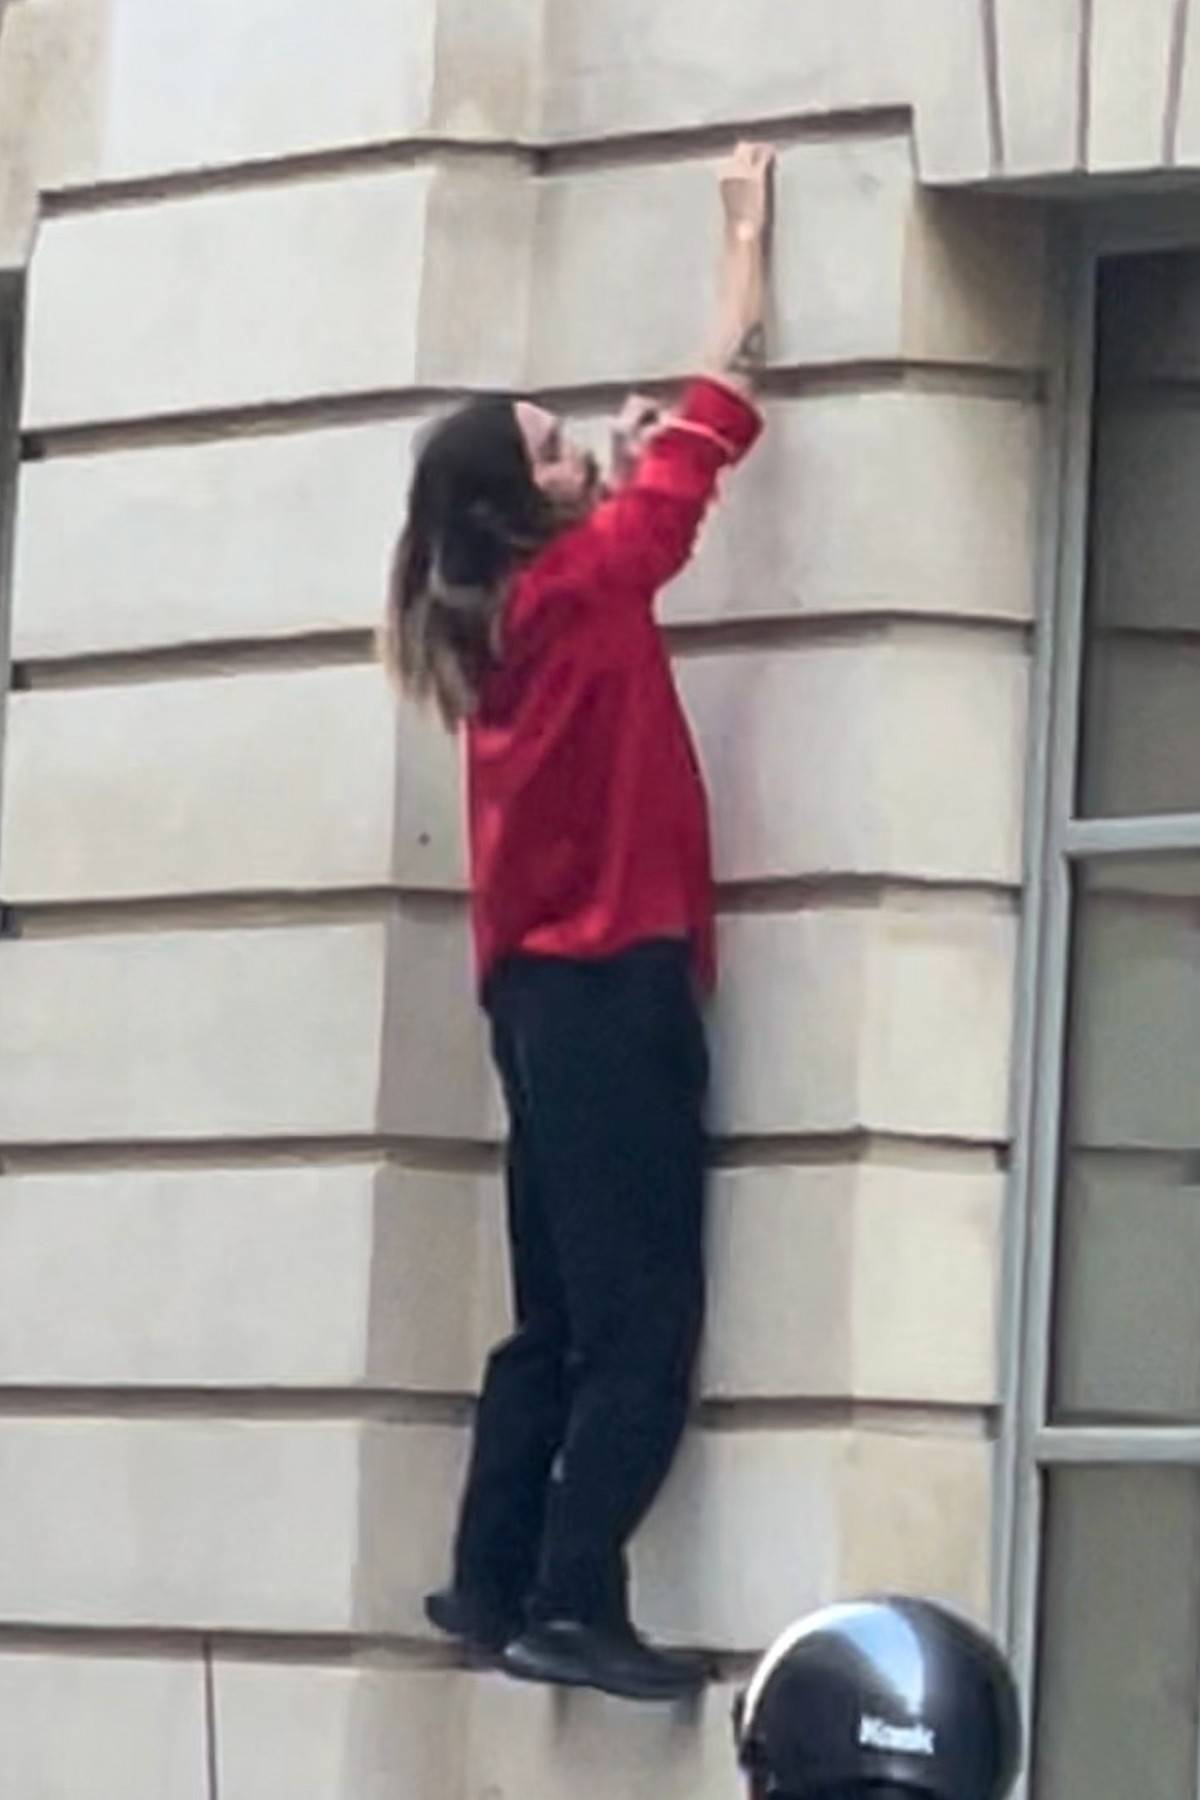 *EXCLUSIVE* Jared Leto spotted climbing a building in Paris